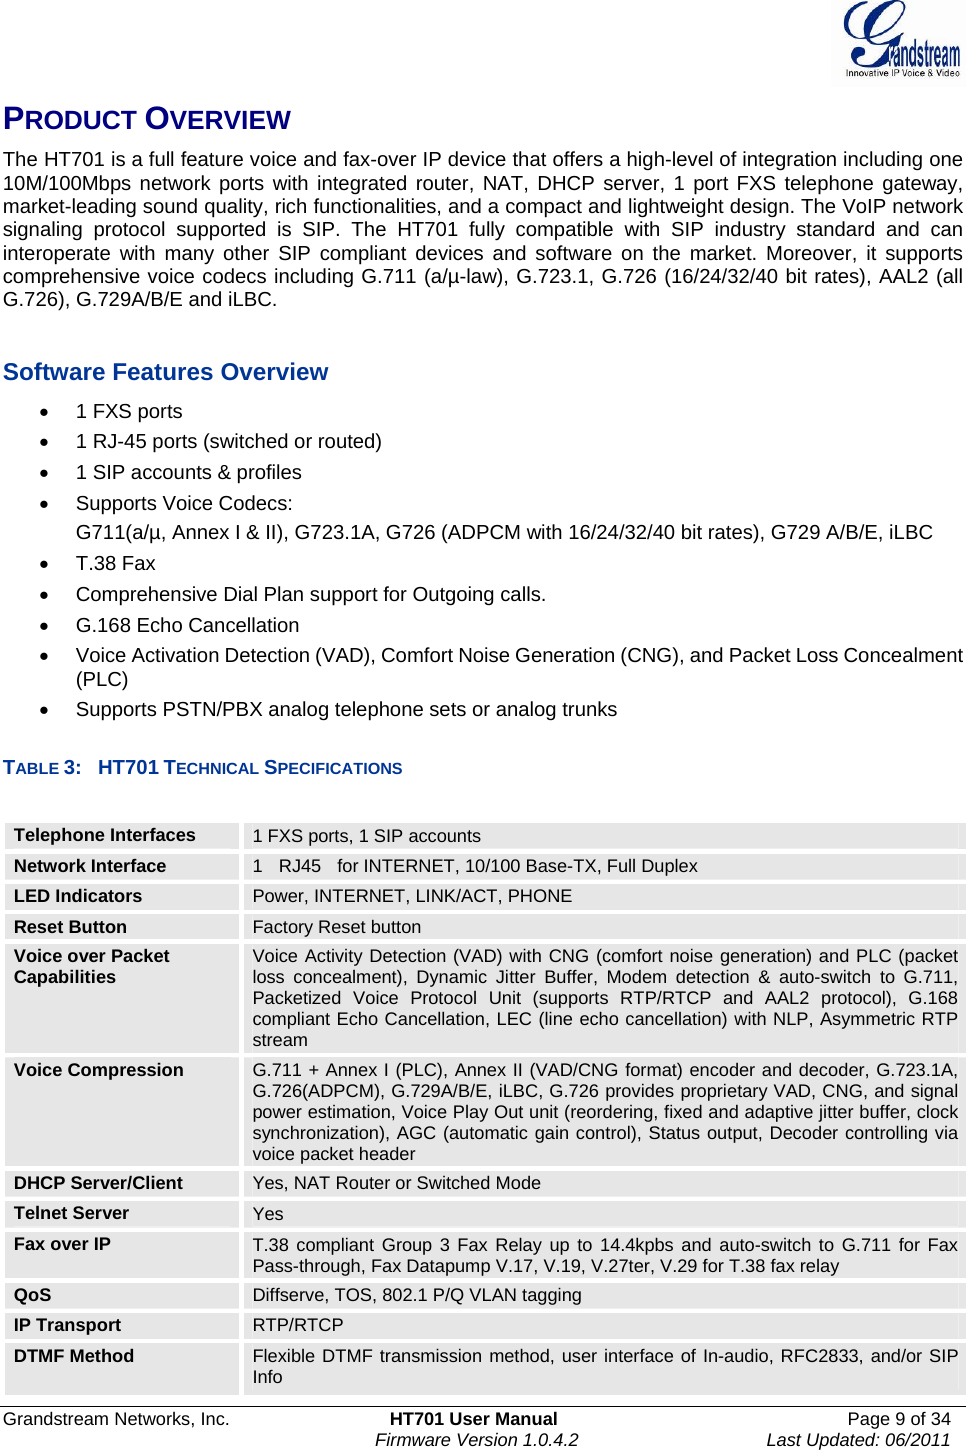  Grandstream Networks, Inc.  HT701 User Manual  Page 9 of 34     Firmware Version 1.0.4.2  Last Updated: 06/2011  PRODUCT OVERVIEW The HT701 is a full feature voice and fax-over IP device that offers a high-level of integration including one 10M/100Mbps network ports with integrated router, NAT, DHCP server, 1 port FXS telephone gateway, market-leading sound quality, rich functionalities, and a compact and lightweight design. The VoIP network signaling protocol supported is SIP. The HT701 fully compatible with SIP industry standard and can interoperate with many other SIP compliant devices and software on the market. Moreover, it supports comprehensive voice codecs including G.711 (a/µ-law), G.723.1, G.726 (16/24/32/40 bit rates), AAL2 (all G.726), G.729A/B/E and iLBC.   Software Features Overview •  1 FXS ports •  1 RJ-45 ports (switched or routed) •  1 SIP accounts &amp; profiles • Supports Voice Codecs:  G711(a/µ, Annex I &amp; II), G723.1A, G726 (ADPCM with 16/24/32/40 bit rates), G729 A/B/E, iLBC • T.38 Fax  •  Comprehensive Dial Plan support for Outgoing calls. • G.168 Echo Cancellation •  Voice Activation Detection (VAD), Comfort Noise Generation (CNG), and Packet Loss Concealment (PLC) •  Supports PSTN/PBX analog telephone sets or analog trunks  TABLE 3:  HT701 TECHNICAL SPECIFICATIONS  Telephone Interfaces  1 FXS ports, 1 SIP accounts     Network Interface  1  RJ45  for INTERNET, 10/100 Base-TX, Full Duplex LED Indicators  Power, INTERNET, LINK/ACT, PHONE Reset Button  Factory Reset button Voice over Packet Capabilities  Voice Activity Detection (VAD) with CNG (comfort noise generation) and PLC (packet loss concealment), Dynamic Jitter Buffer, Modem detection &amp; auto-switch to G.711, Packetized Voice Protocol Unit (supports RTP/RTCP and AAL2 protocol), G.168 compliant Echo Cancellation, LEC (line echo cancellation) with NLP, Asymmetric RTP stream Voice Compression  G.711 + Annex I (PLC), Annex II (VAD/CNG format) encoder and decoder, G.723.1A, G.726(ADPCM), G.729A/B/E, iLBC, G.726 provides proprietary VAD, CNG, and signal power estimation, Voice Play Out unit (reordering, fixed and adaptive jitter buffer, clock synchronization), AGC (automatic gain control), Status output, Decoder controlling via voice packet header DHCP Server/Client  Yes, NAT Router or Switched Mode Telnet Server  Yes Fax over IP  T.38 compliant Group 3 Fax Relay up to 14.4kpbs and auto-switch to G.711 for Fax Pass-through, Fax Datapump V.17, V.19, V.27ter, V.29 for T.38 fax relay QoS  Diffserve, TOS, 802.1 P/Q VLAN tagging IP Transport  RTP/RTCP  DTMF Method  Flexible DTMF transmission method, user interface of In-audio, RFC2833, and/or SIP Info 